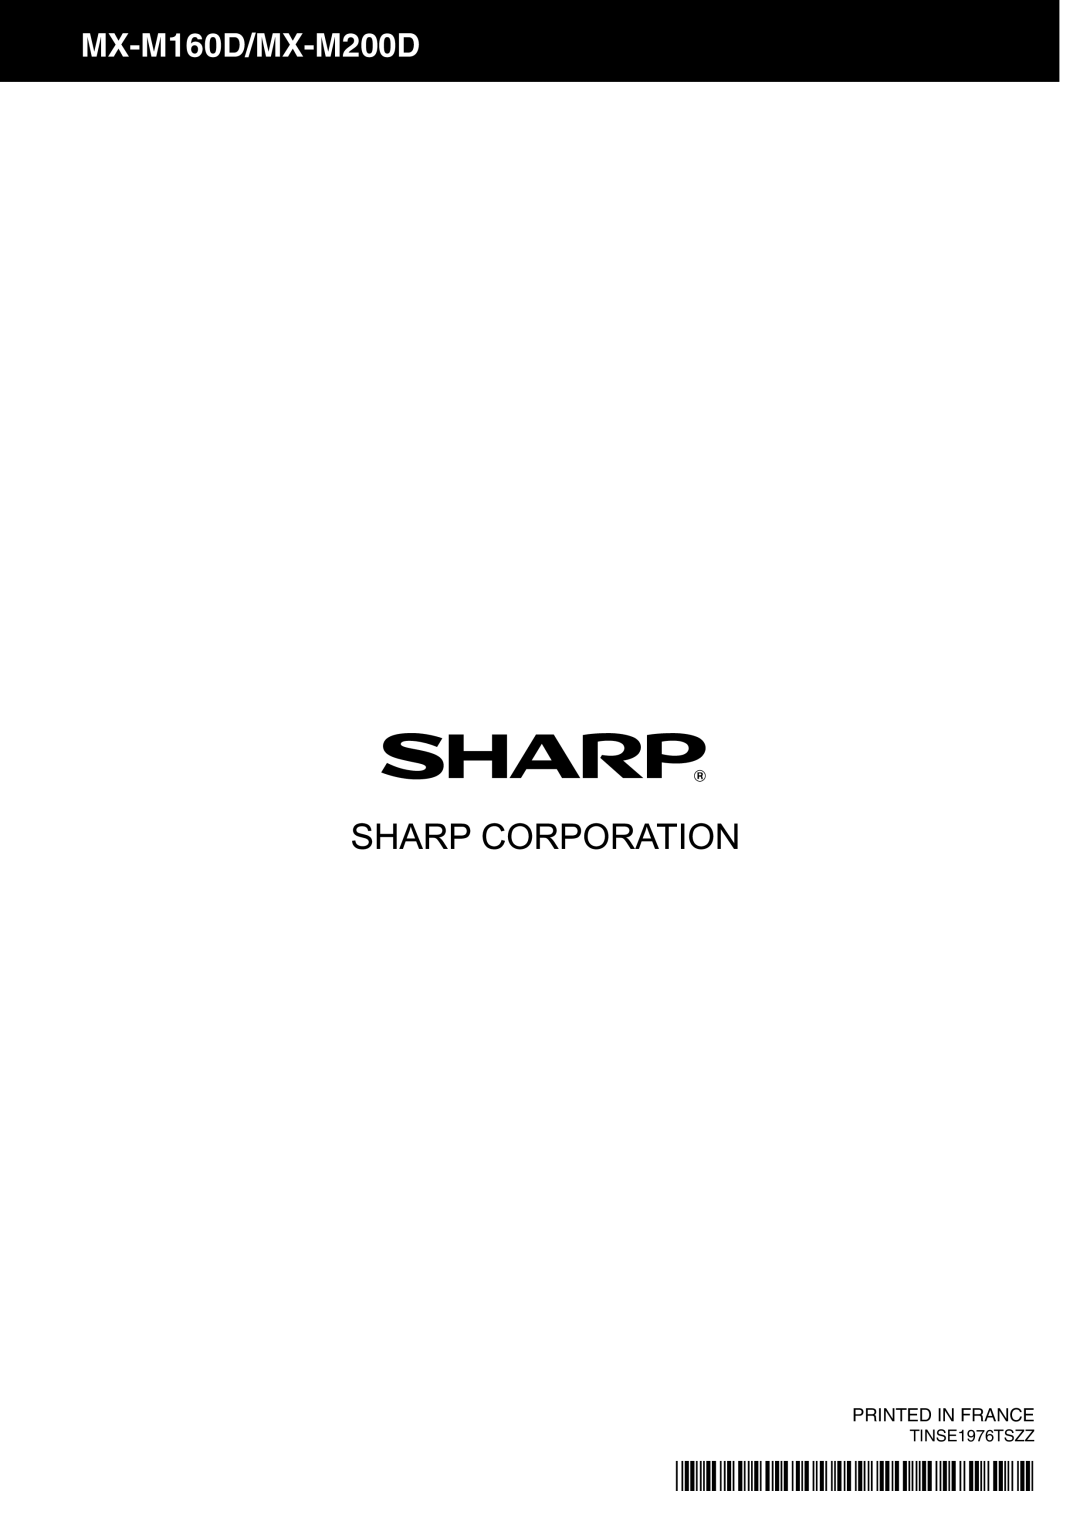 Sharp operation manual MX-M160D/MX-M200D, Printed In France 